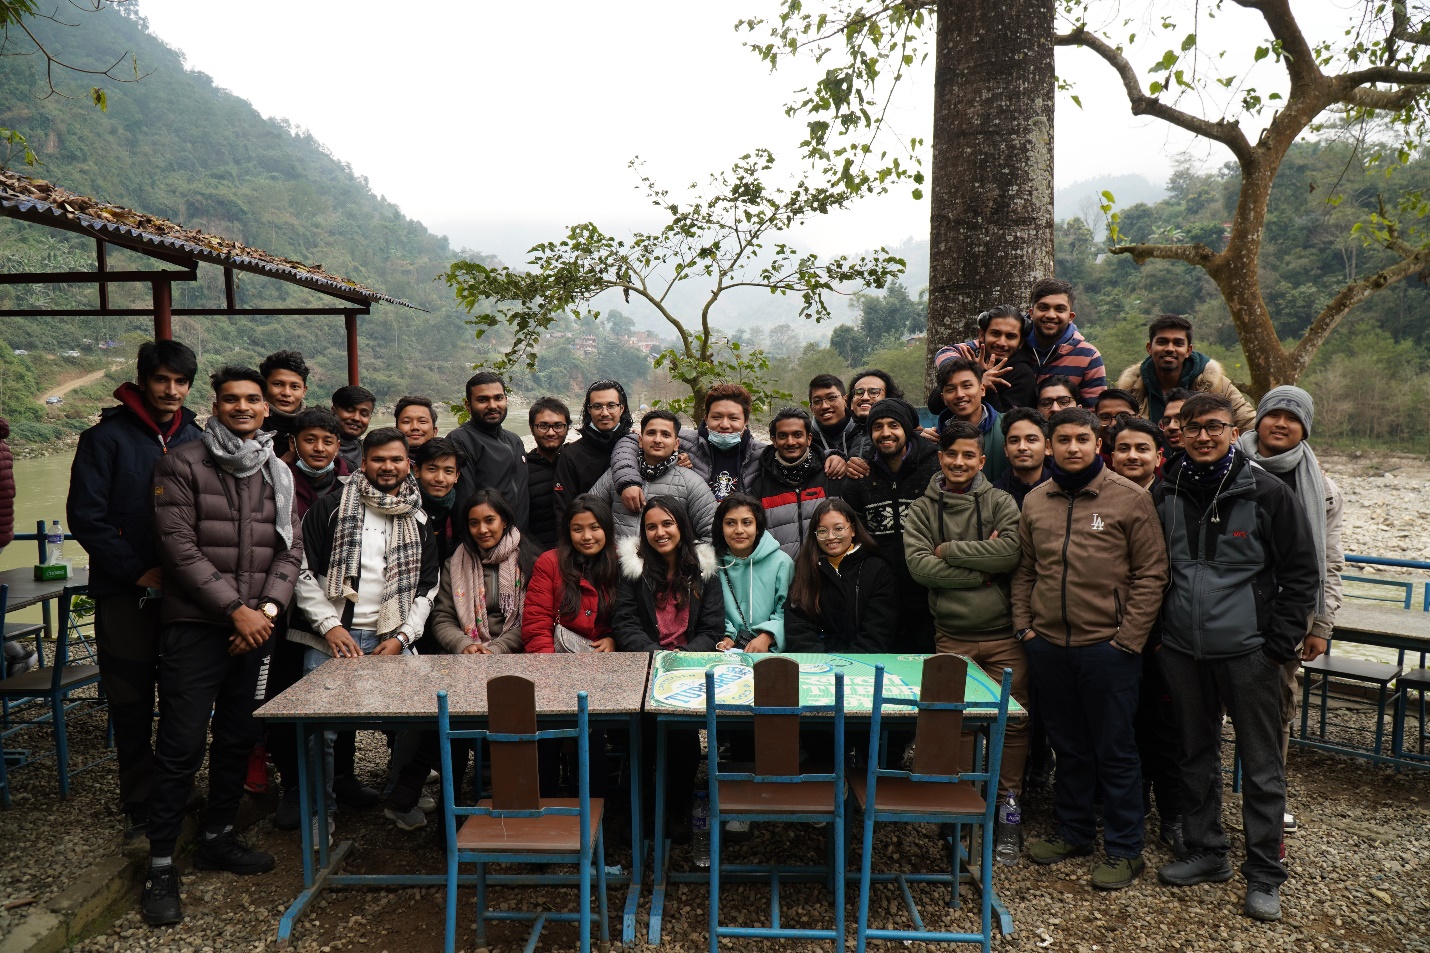 report on educational tour to pokhara in nepali language